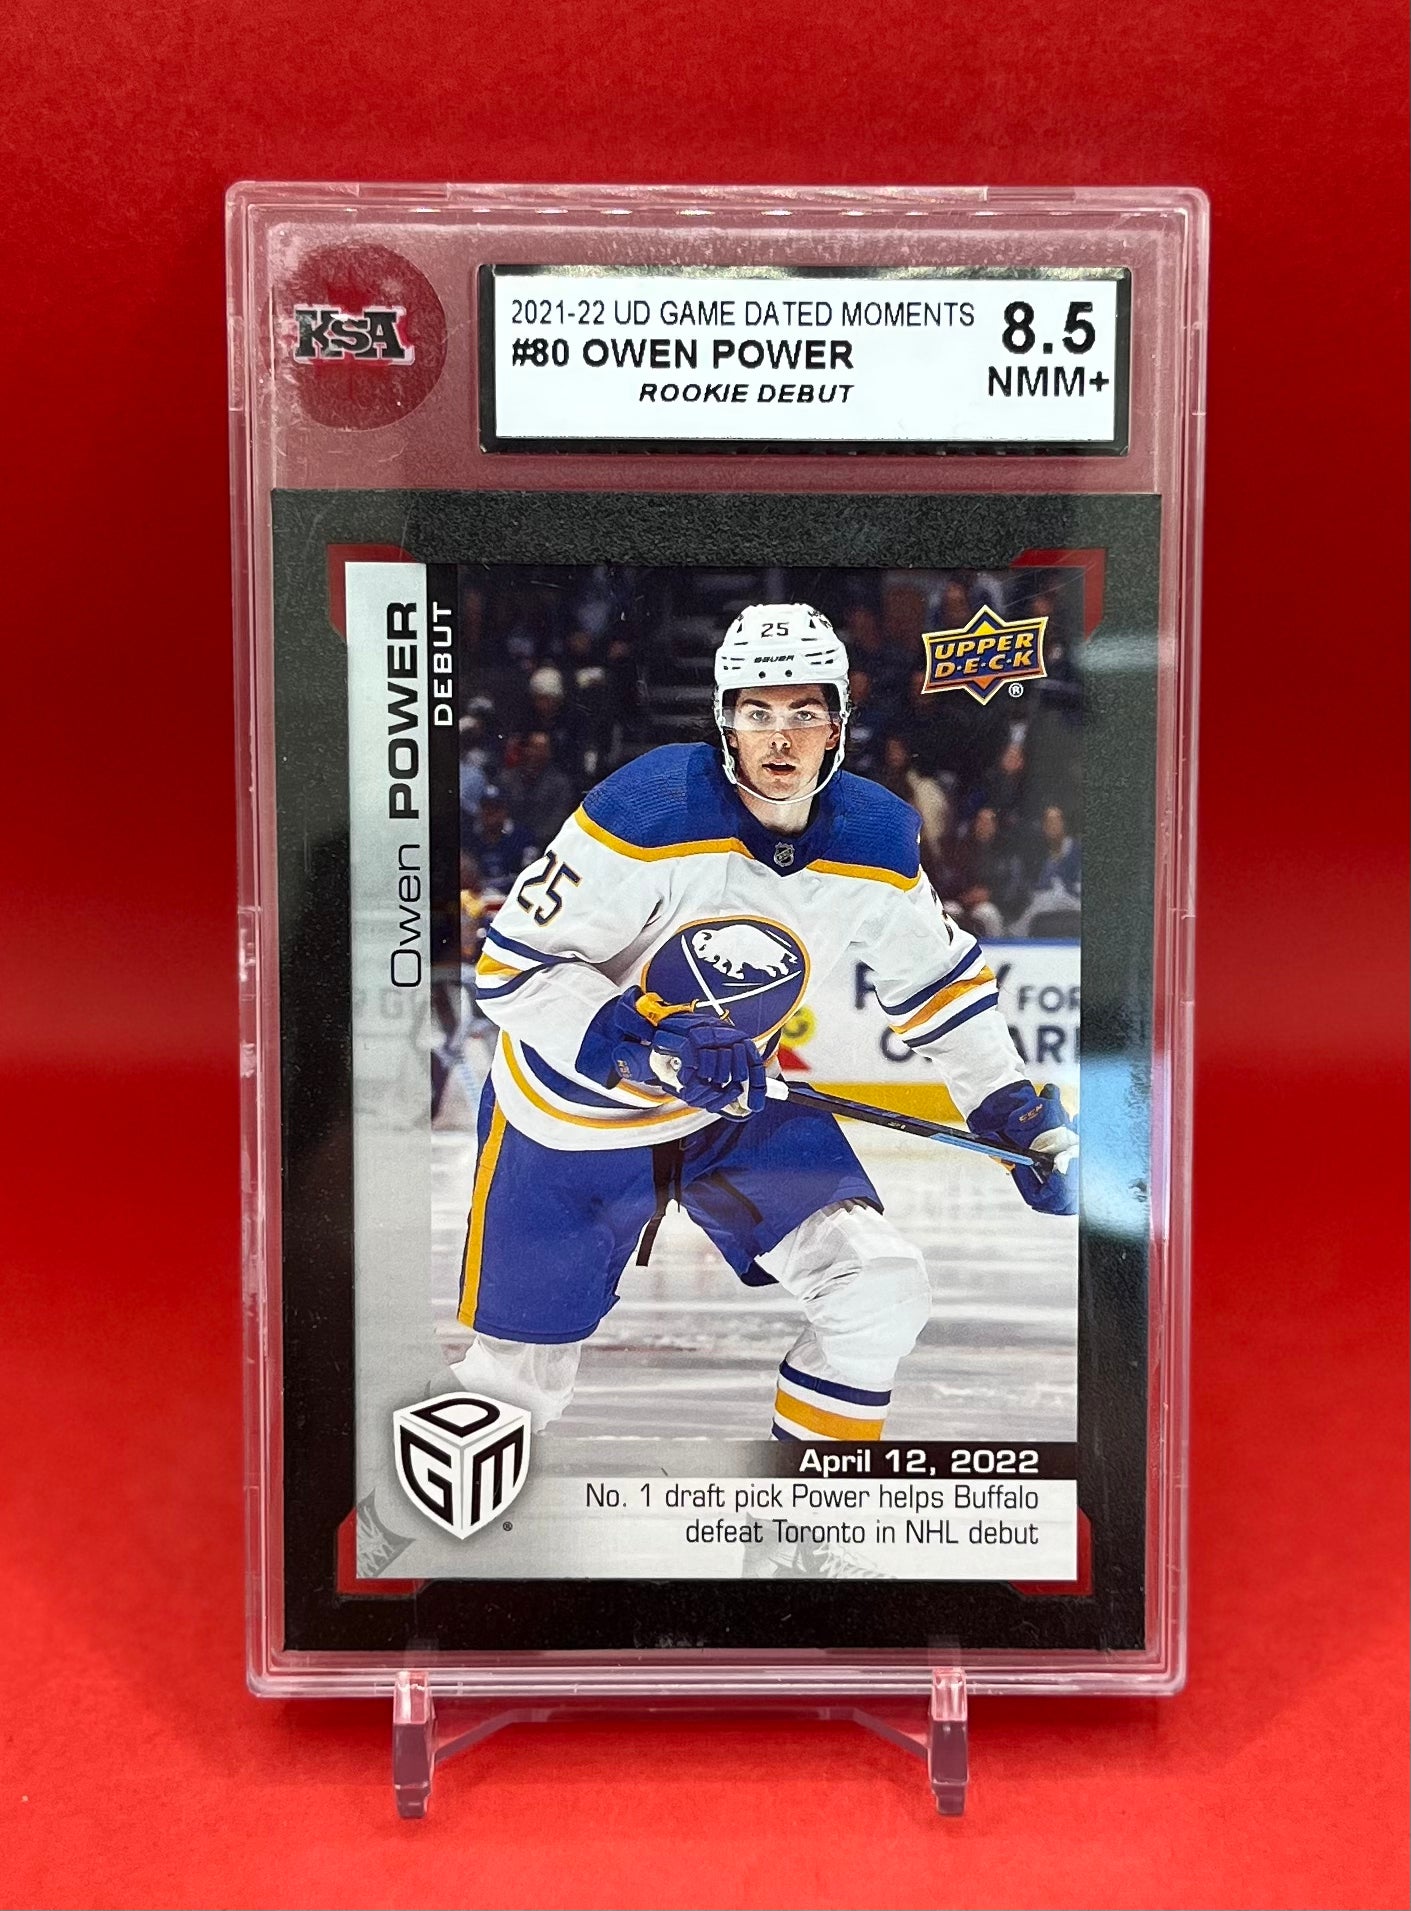 2021-22 #80 OWEN POWER UD GAME DATED MOMENTS - KSA 8.5 NMM+